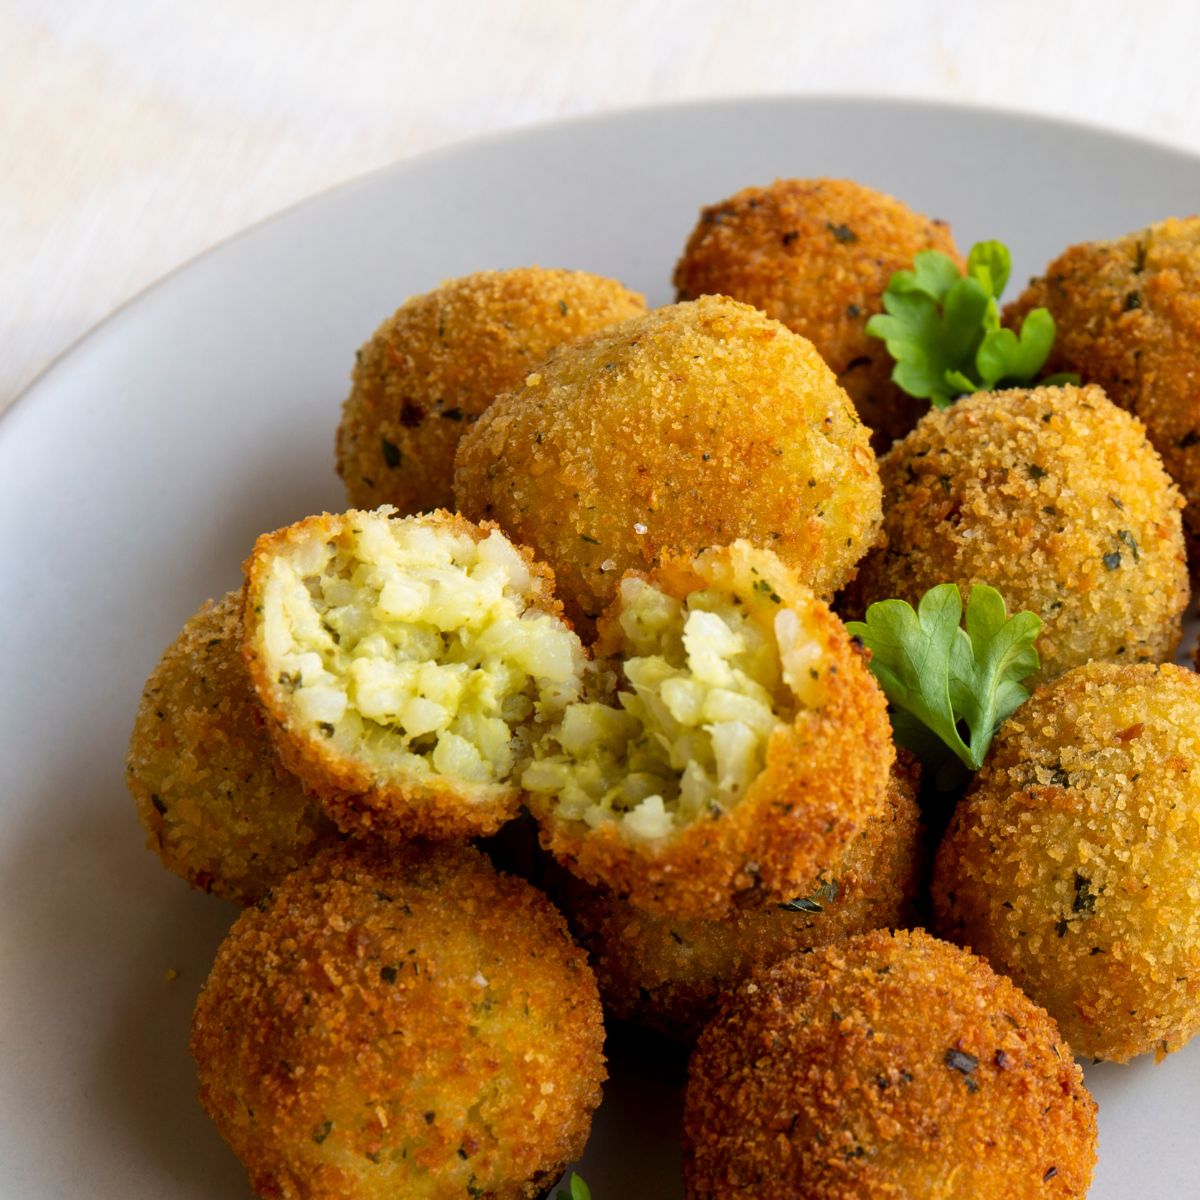 Risotto balls sprinkles with parsley.